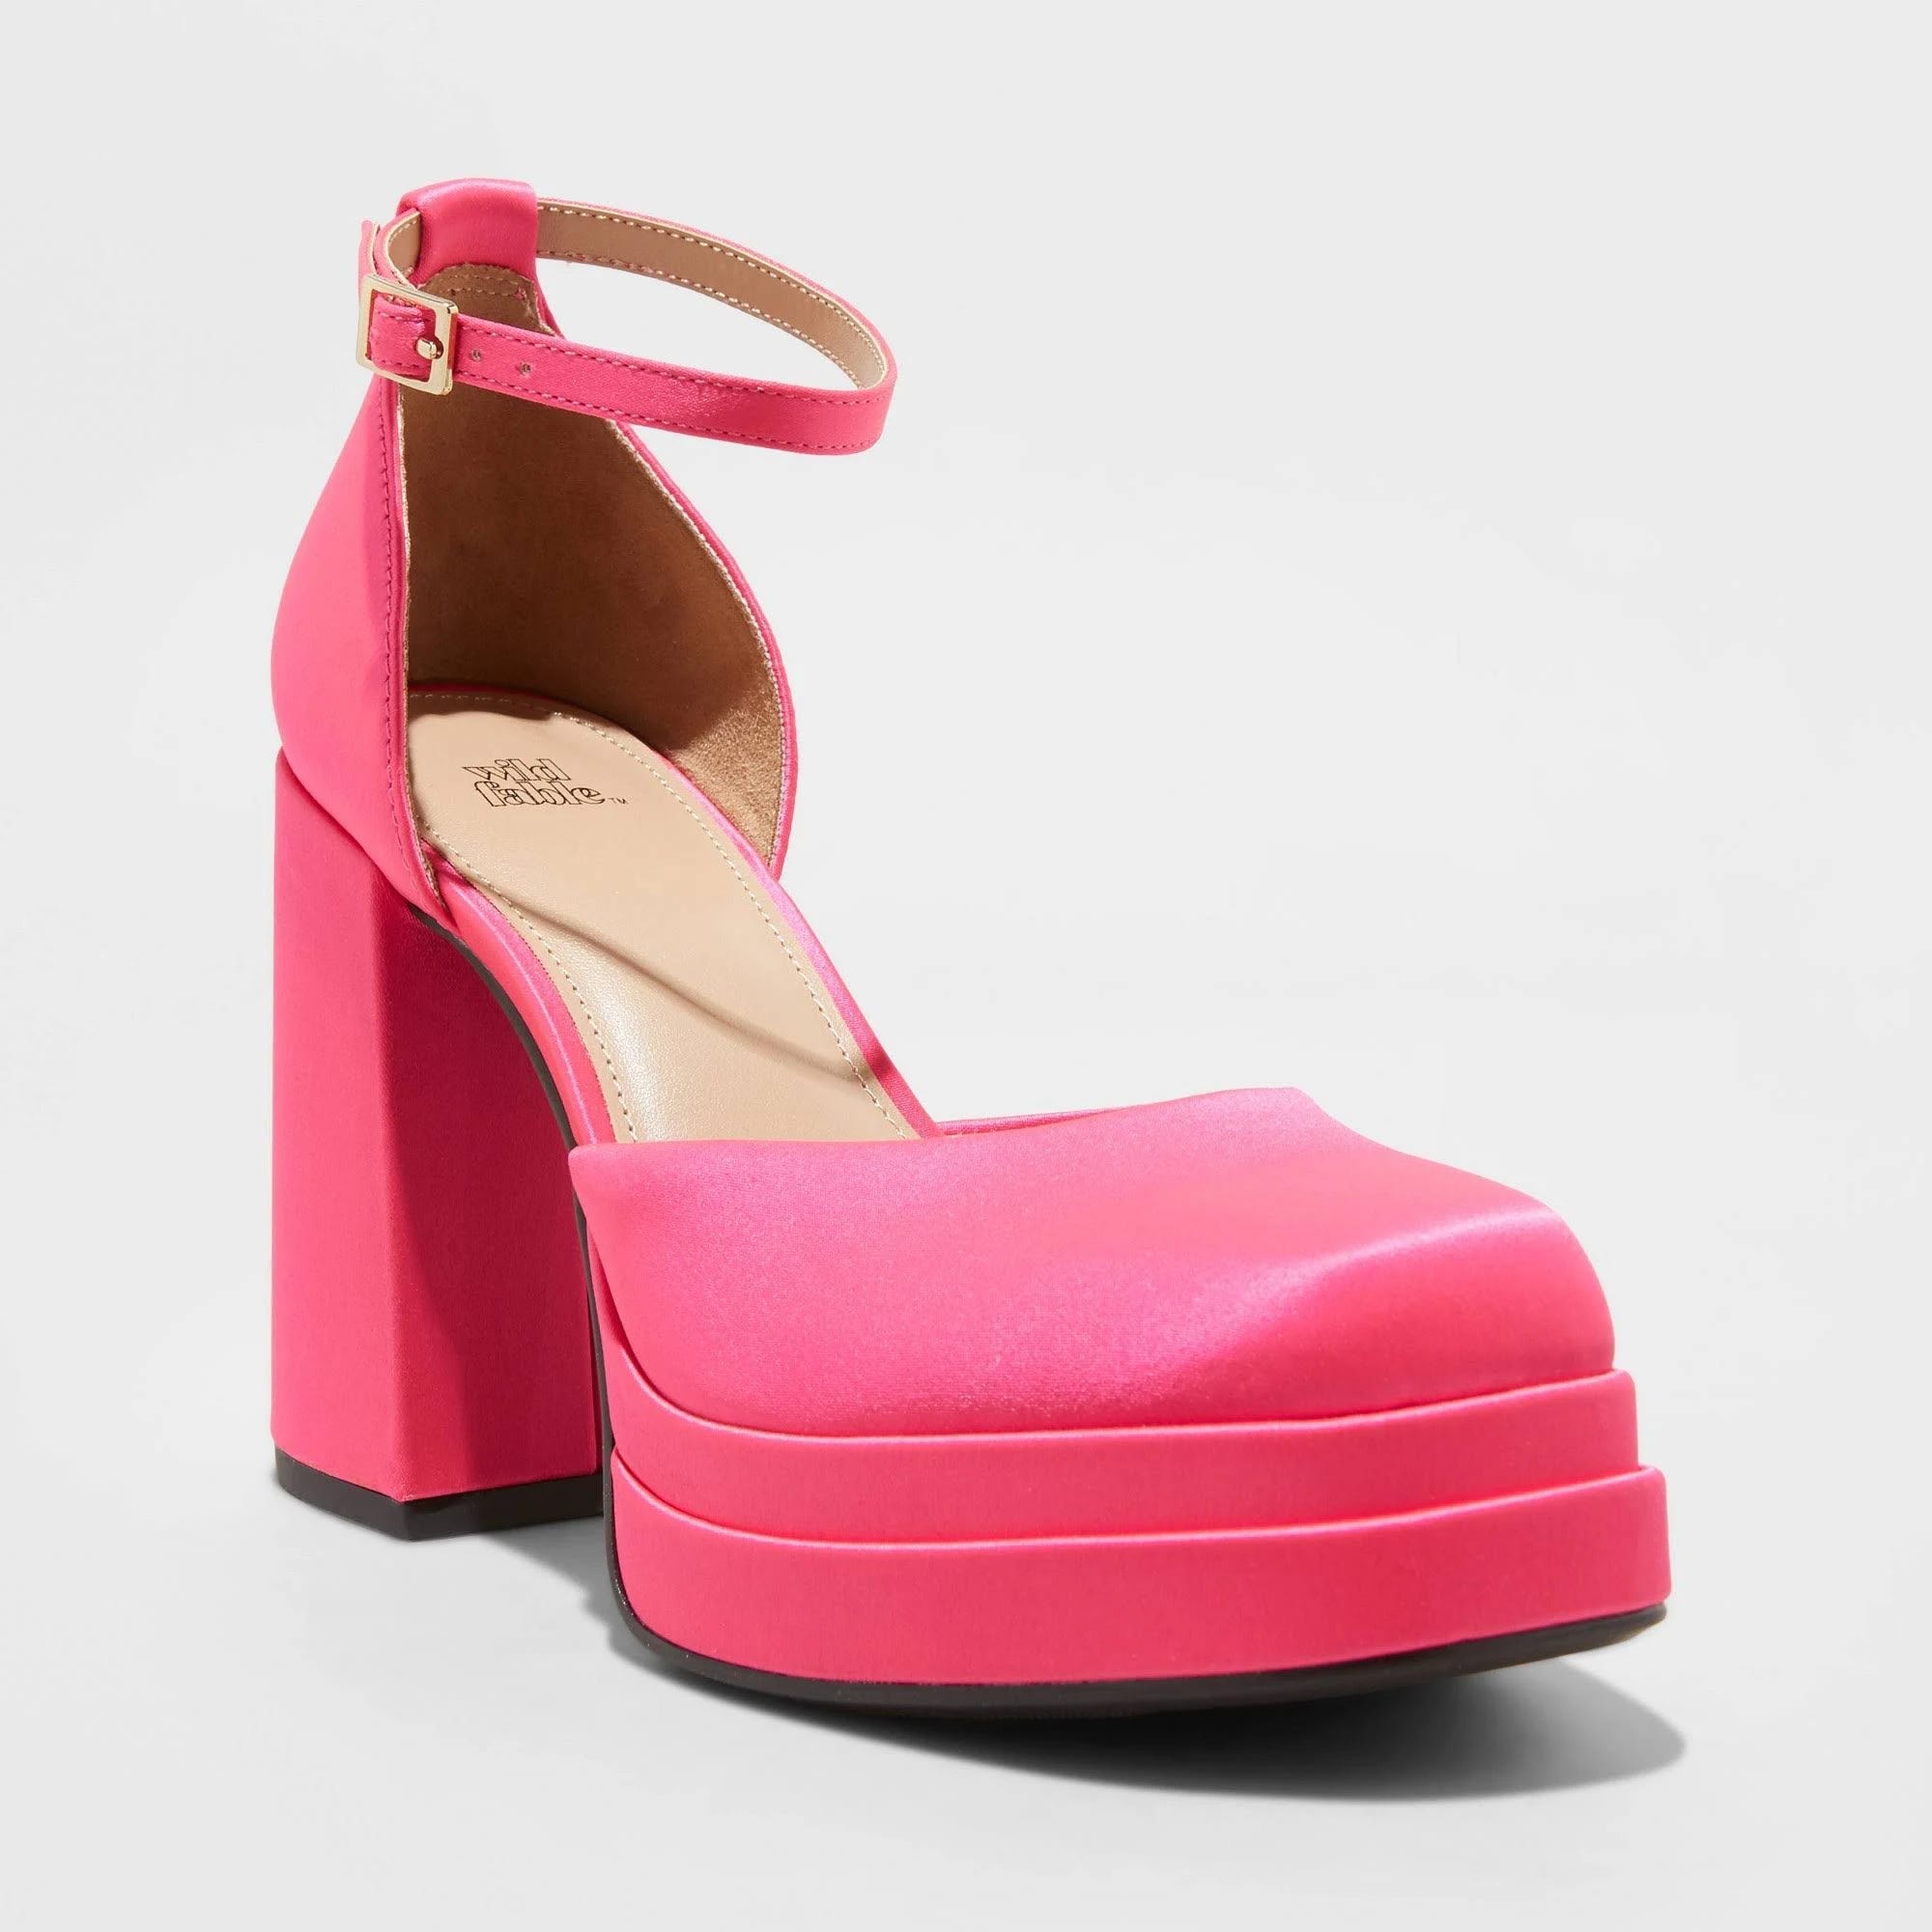 Elegant Pink Pump Shoe from Wild Fable | Image